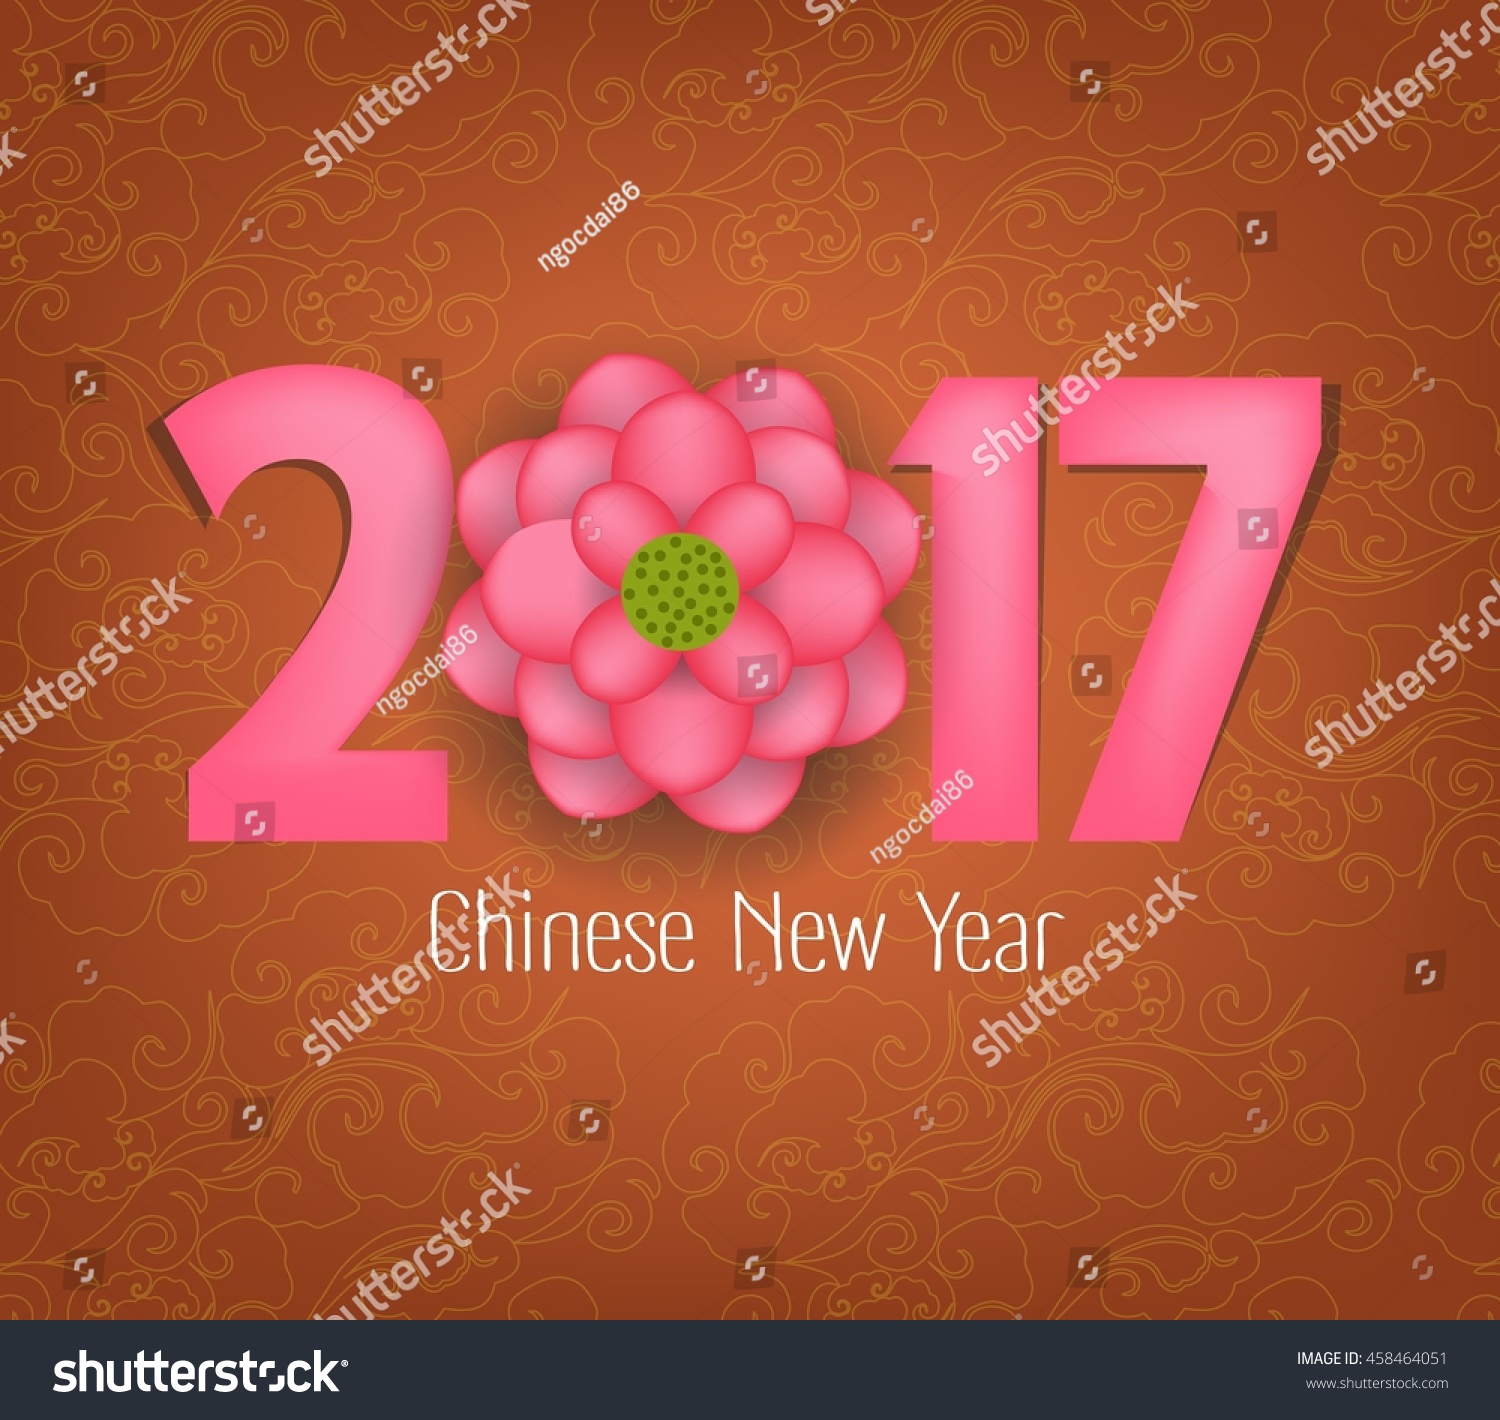 Chinese New Year 2017 Blooming Flower Design #458464051